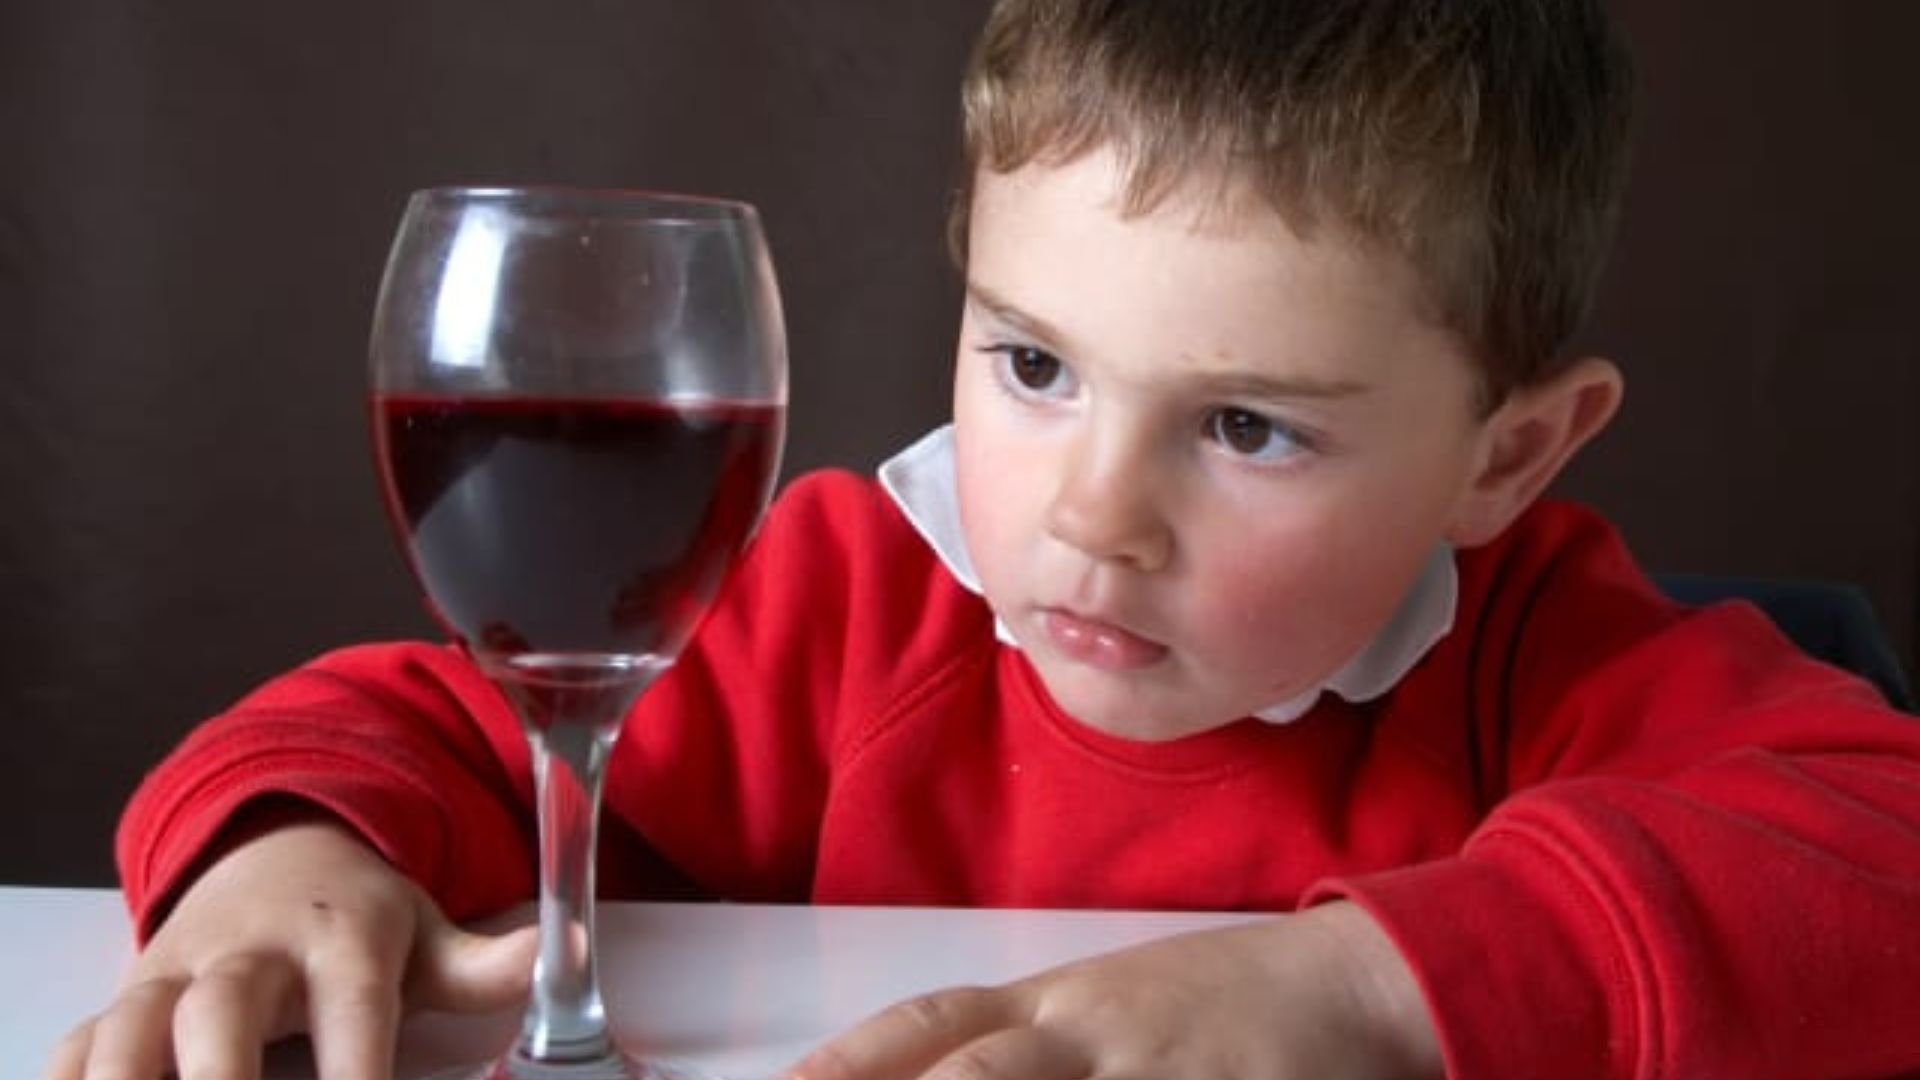  Wine and Kids: the Risks and Dangers of Underage Drinking